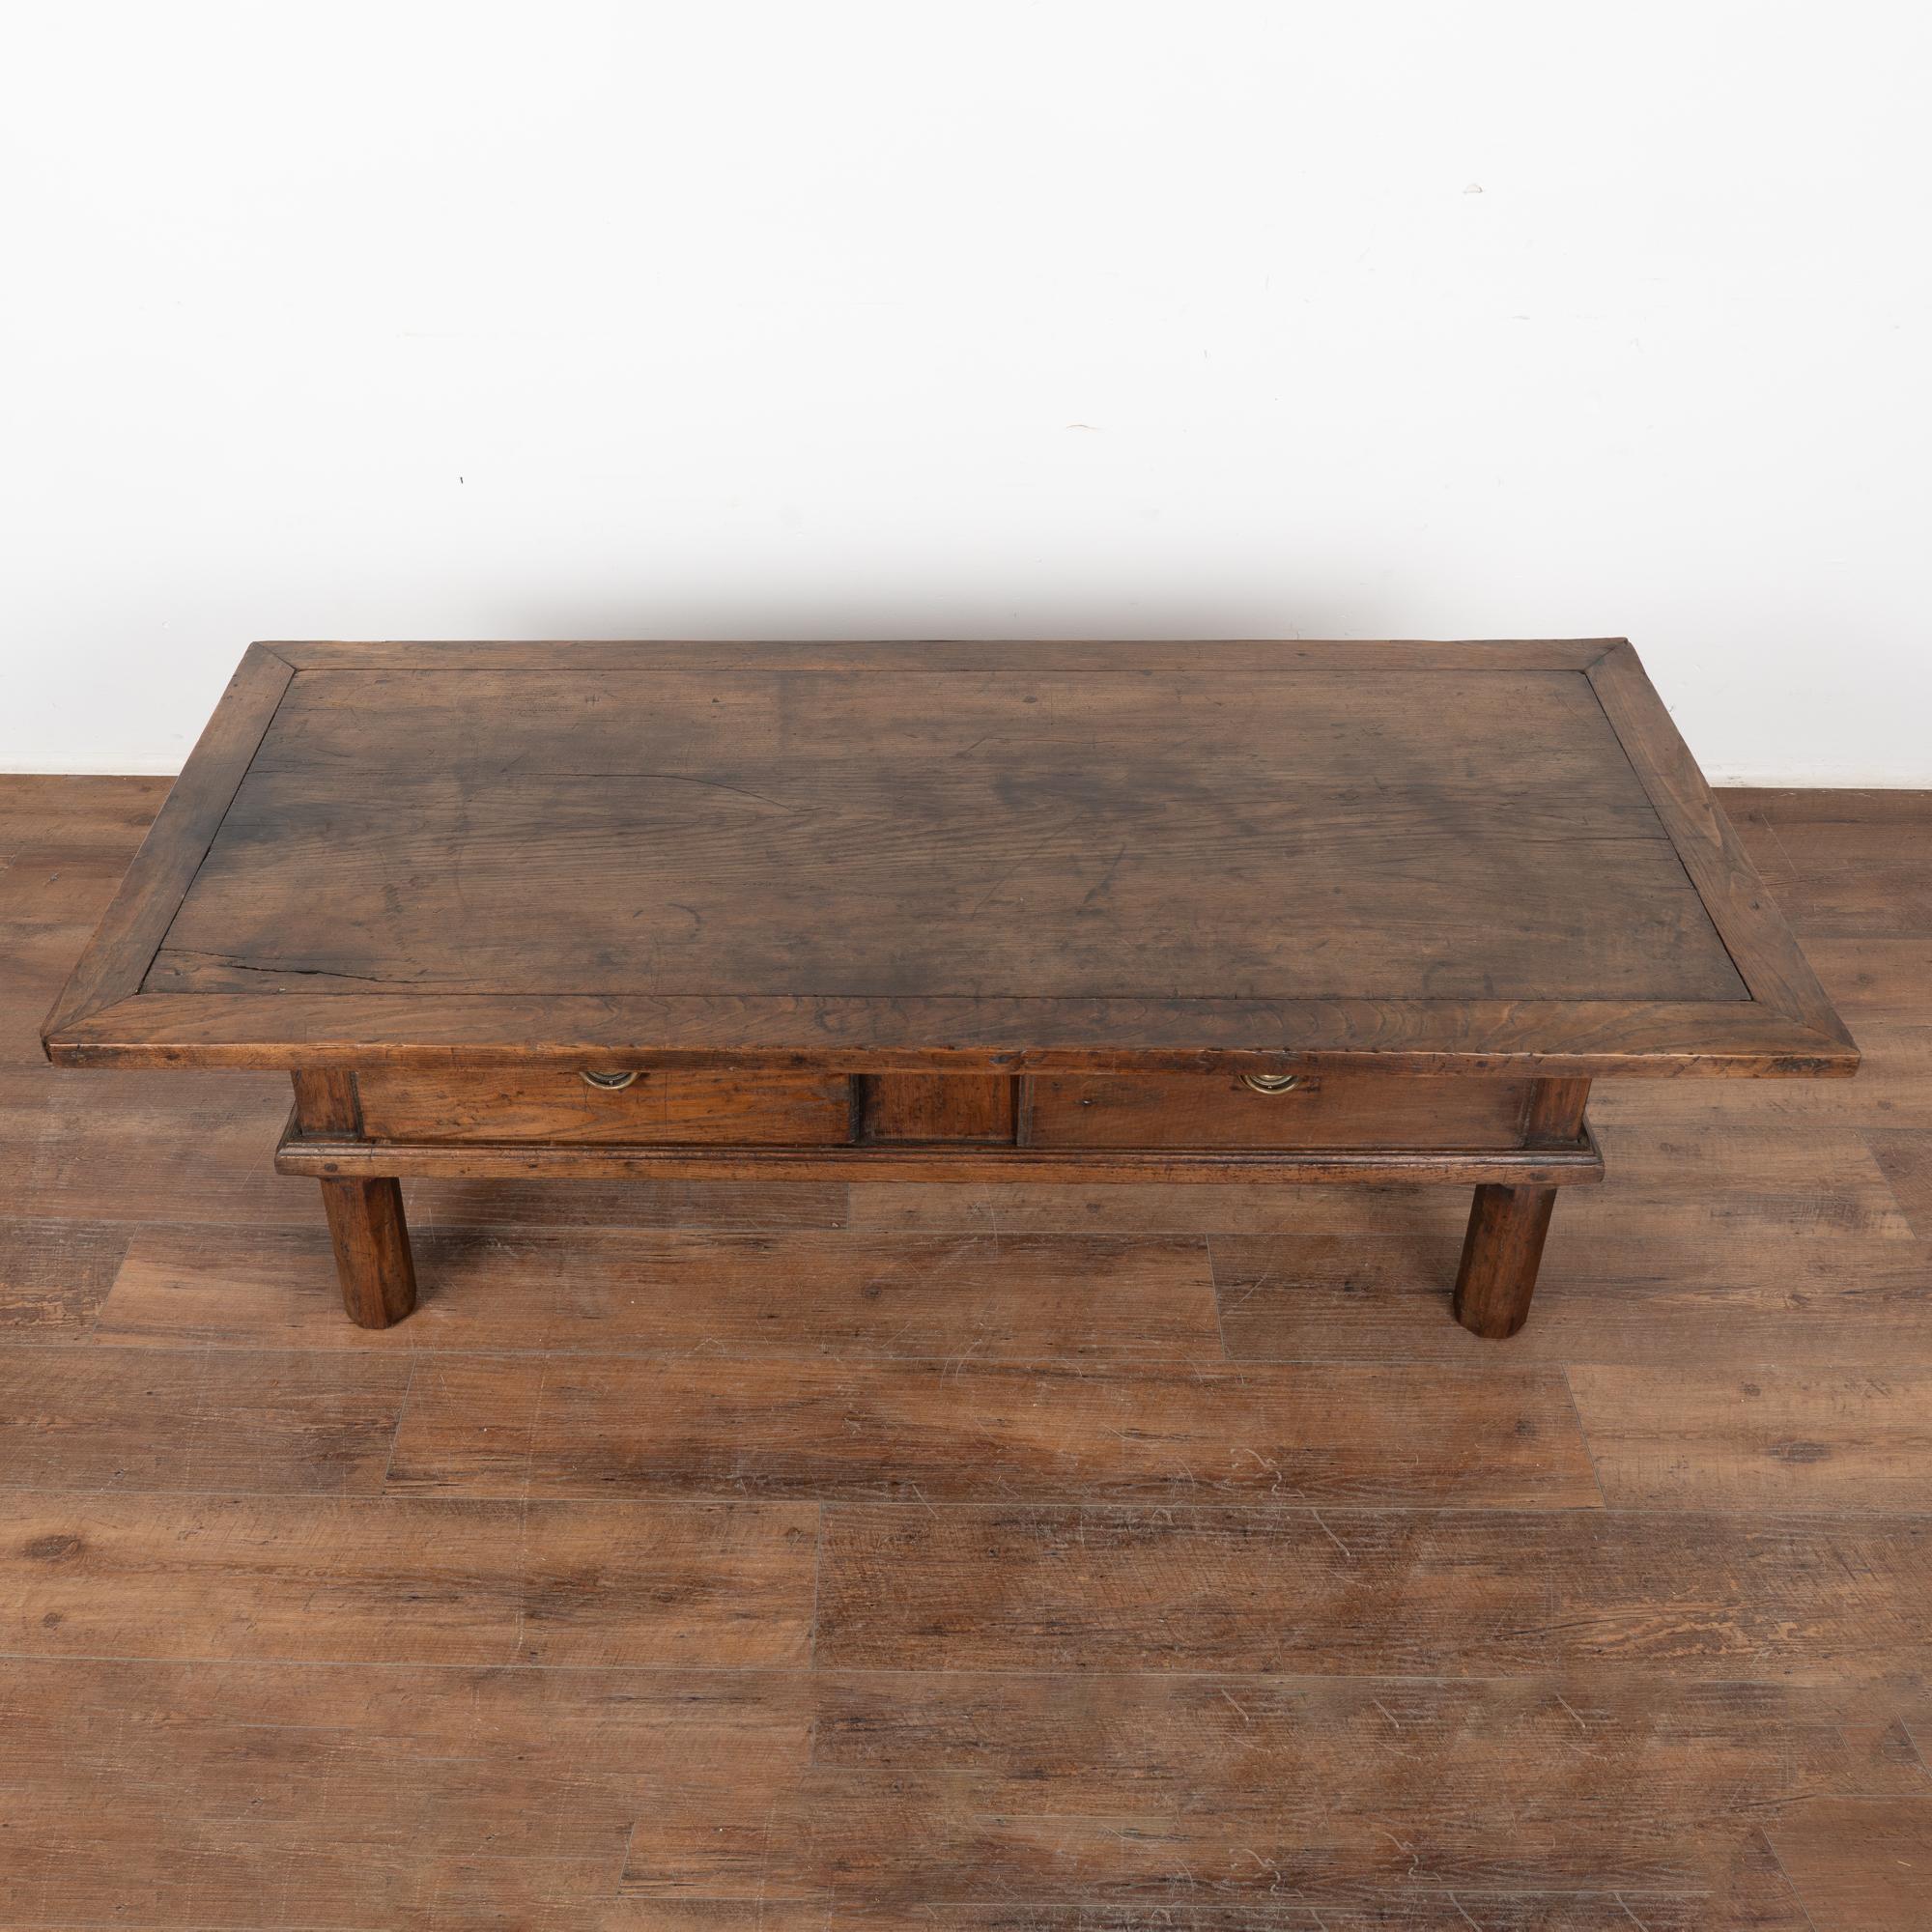 Oak French Country Two Drawer Coffee Table, circa 1820-40